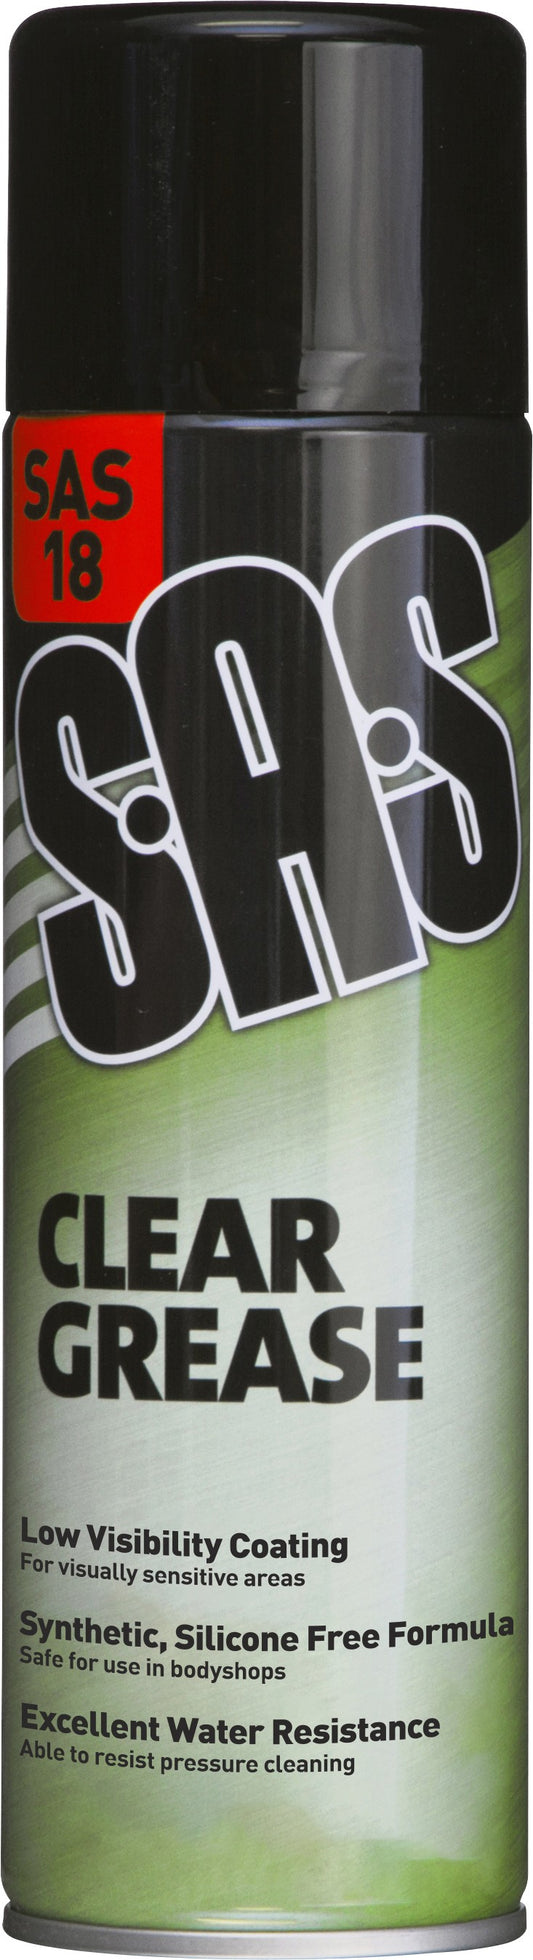 S.A.S Clear Grease 500ml